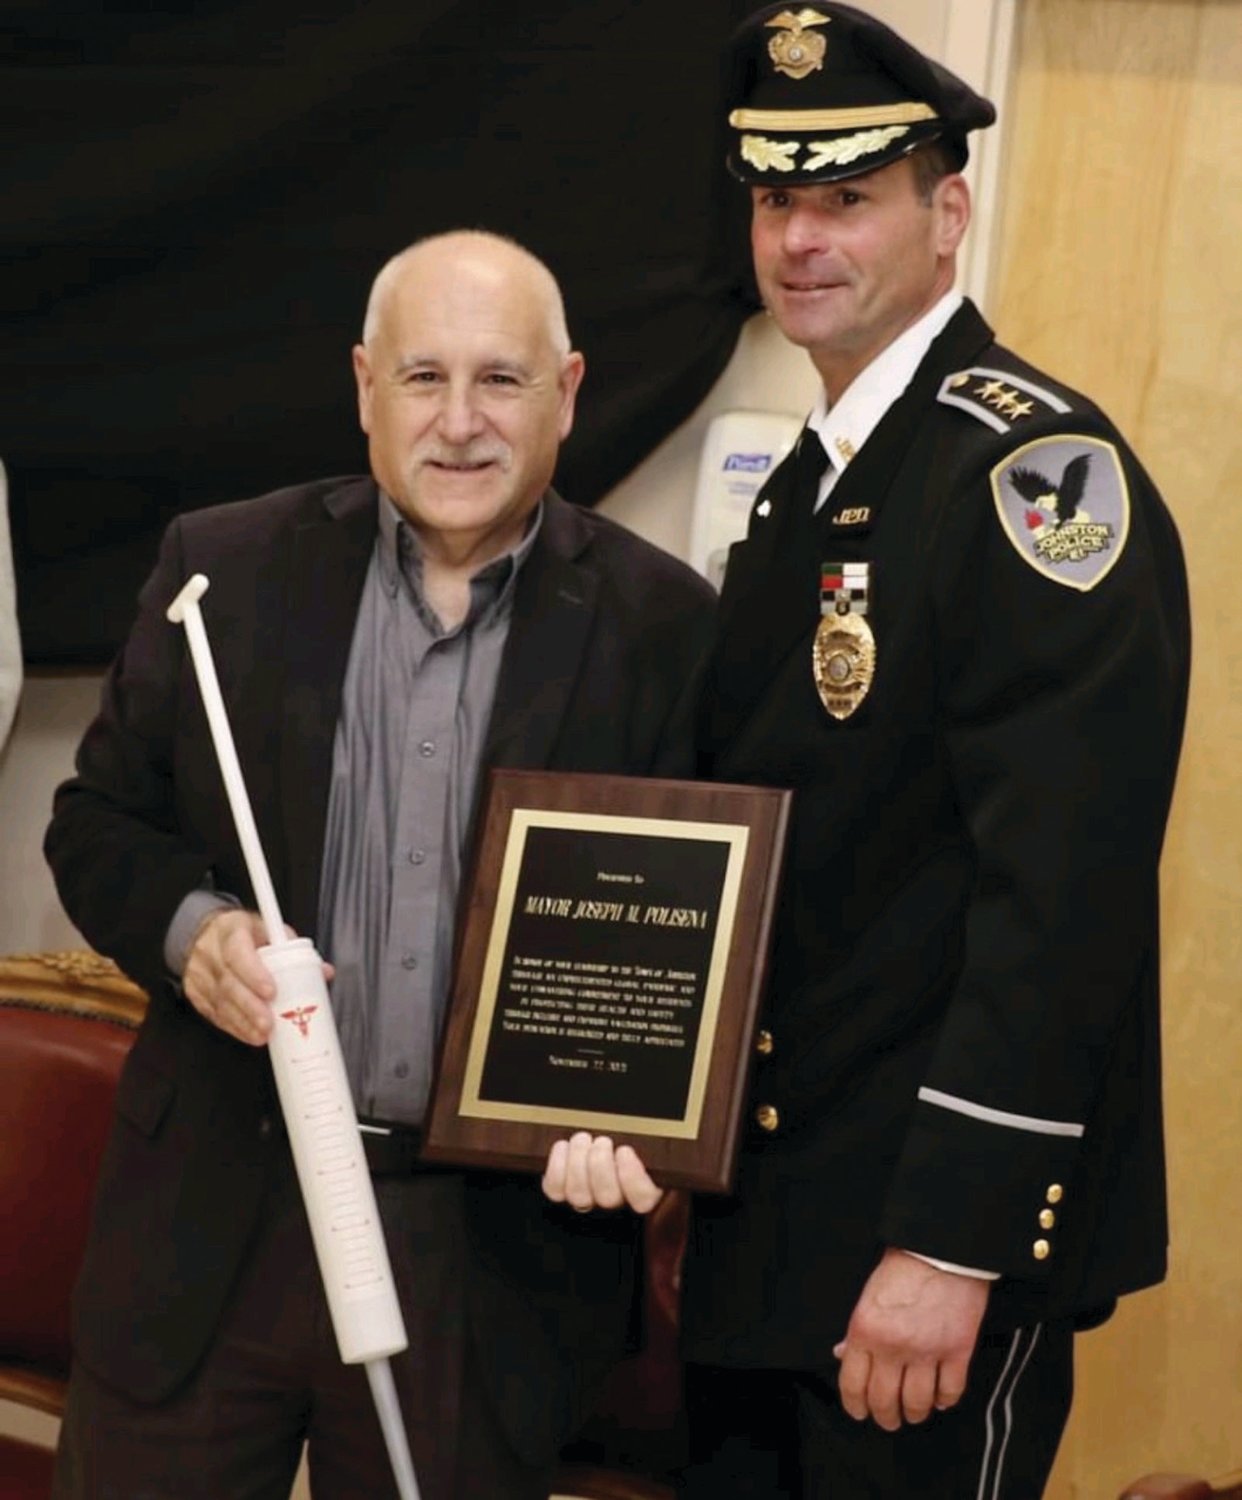 AWESOME AWARDS: Johnston Mayor Joseph M. Polisena in all smiles after receiving two awards - an inflated syringe and the JPD’s Civilians Award for Meritorious Acts - from Police Chief Joseph Razza during the recent Recognition of Excellence Ceremony.